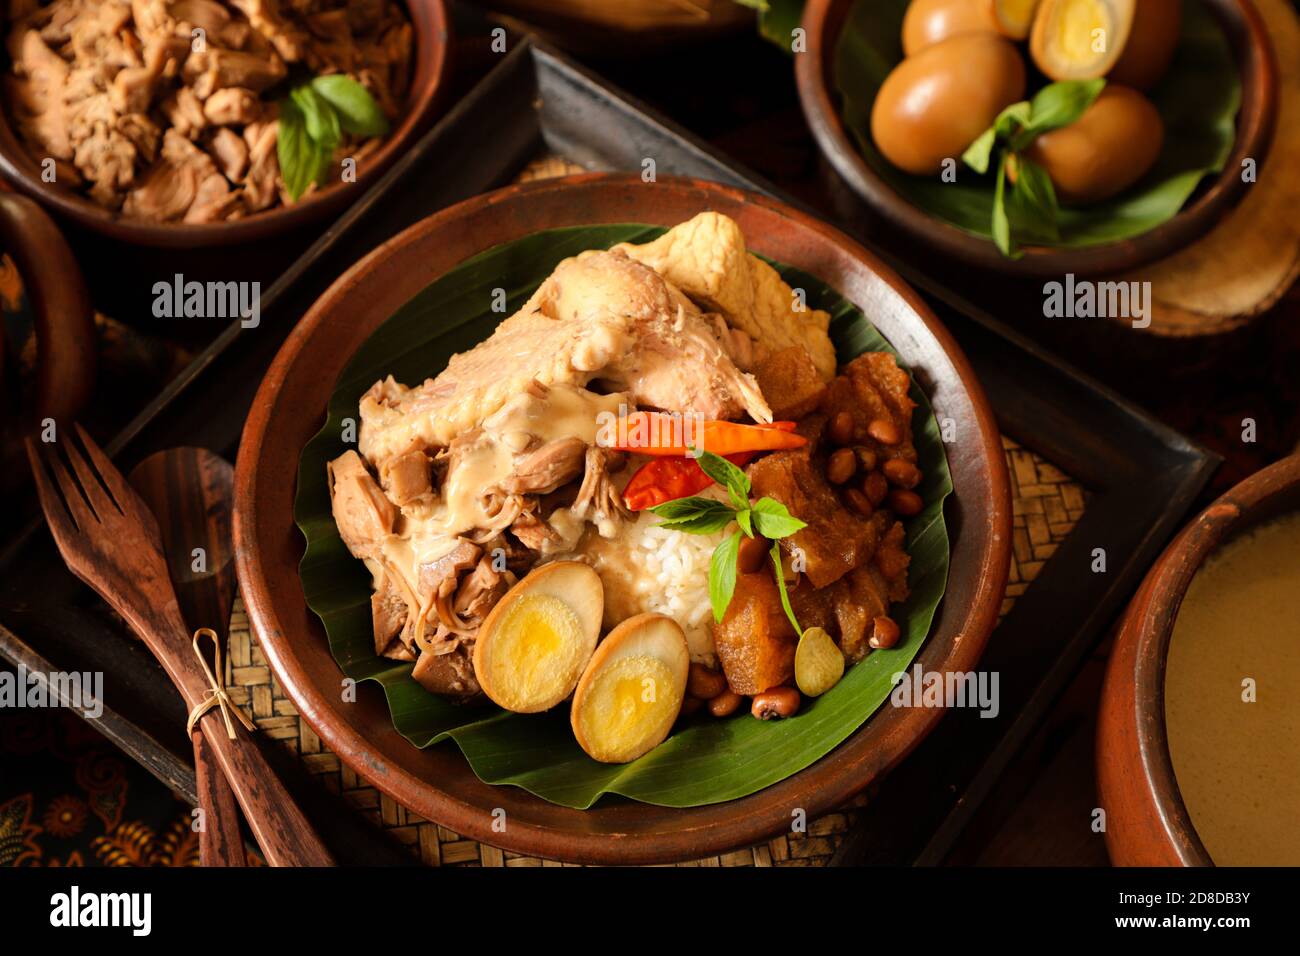 Nasi Gudeg. Javanese meal of rice with jackfruit stew, chicken curry, and spicy cattle skin cracker stew Stock Photo